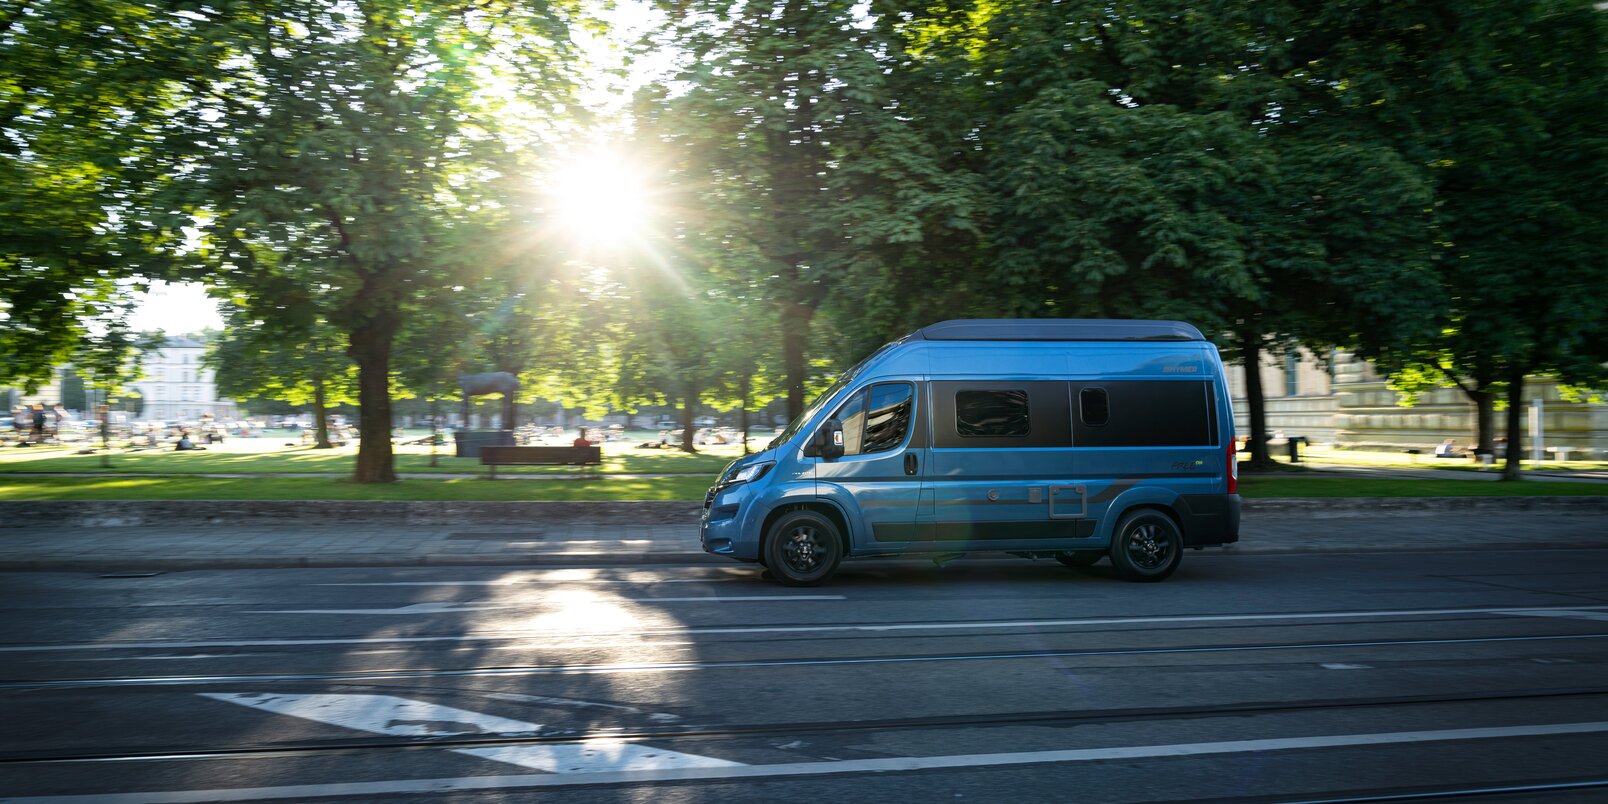 HYMER Free 540 Blue Evolution driving on a road next to a park with meadow, trees, benches and people